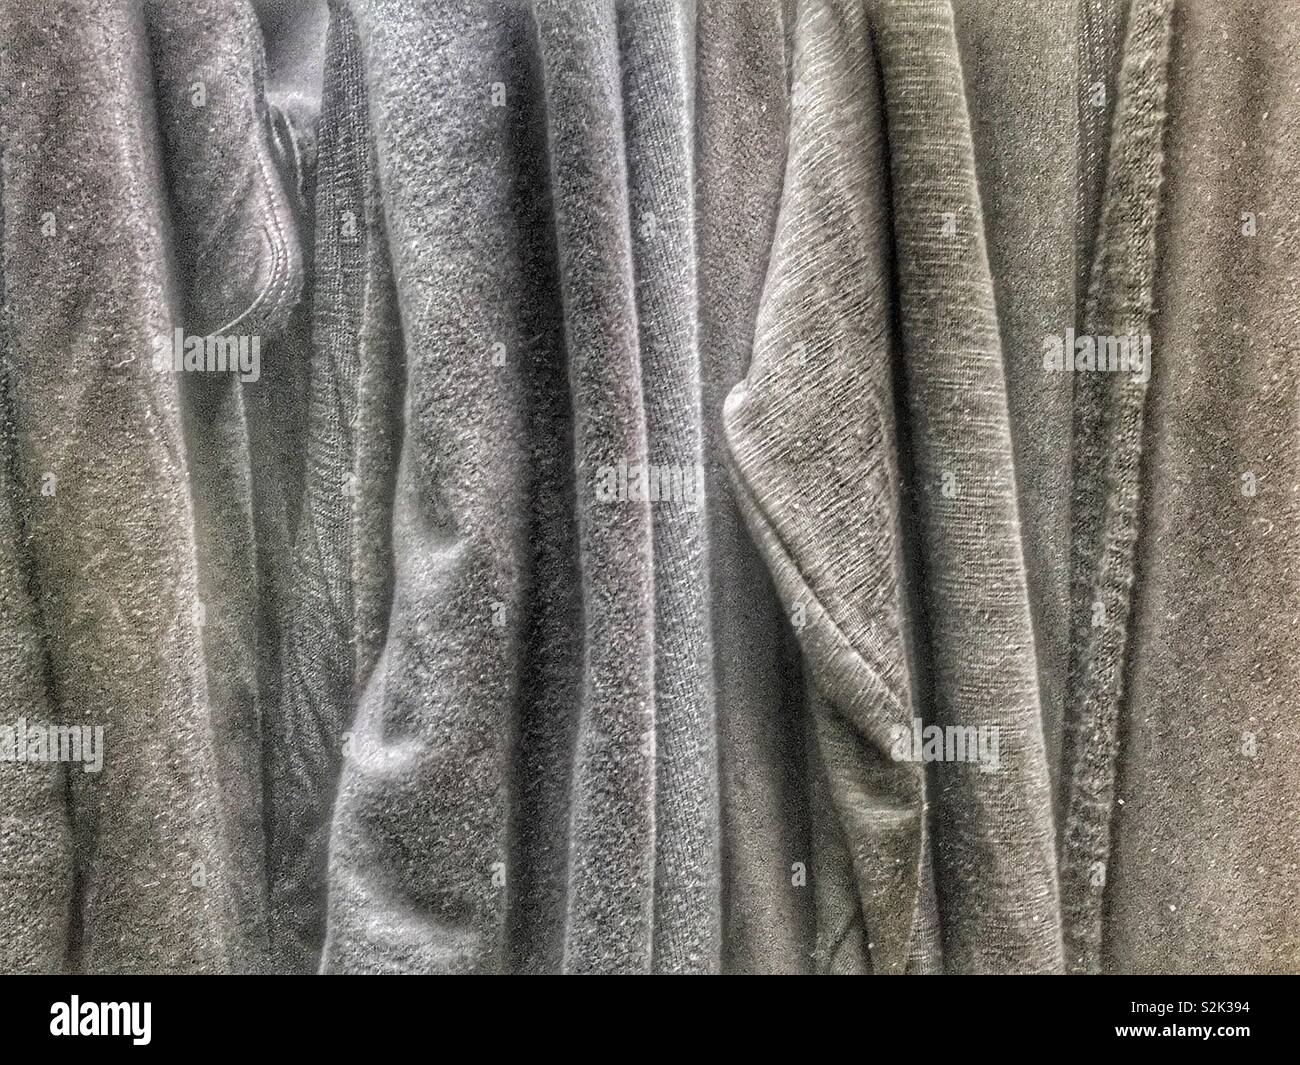 Side view of many fashionable muted grey hued clothes hanging on a clothing rack. Stock Photo